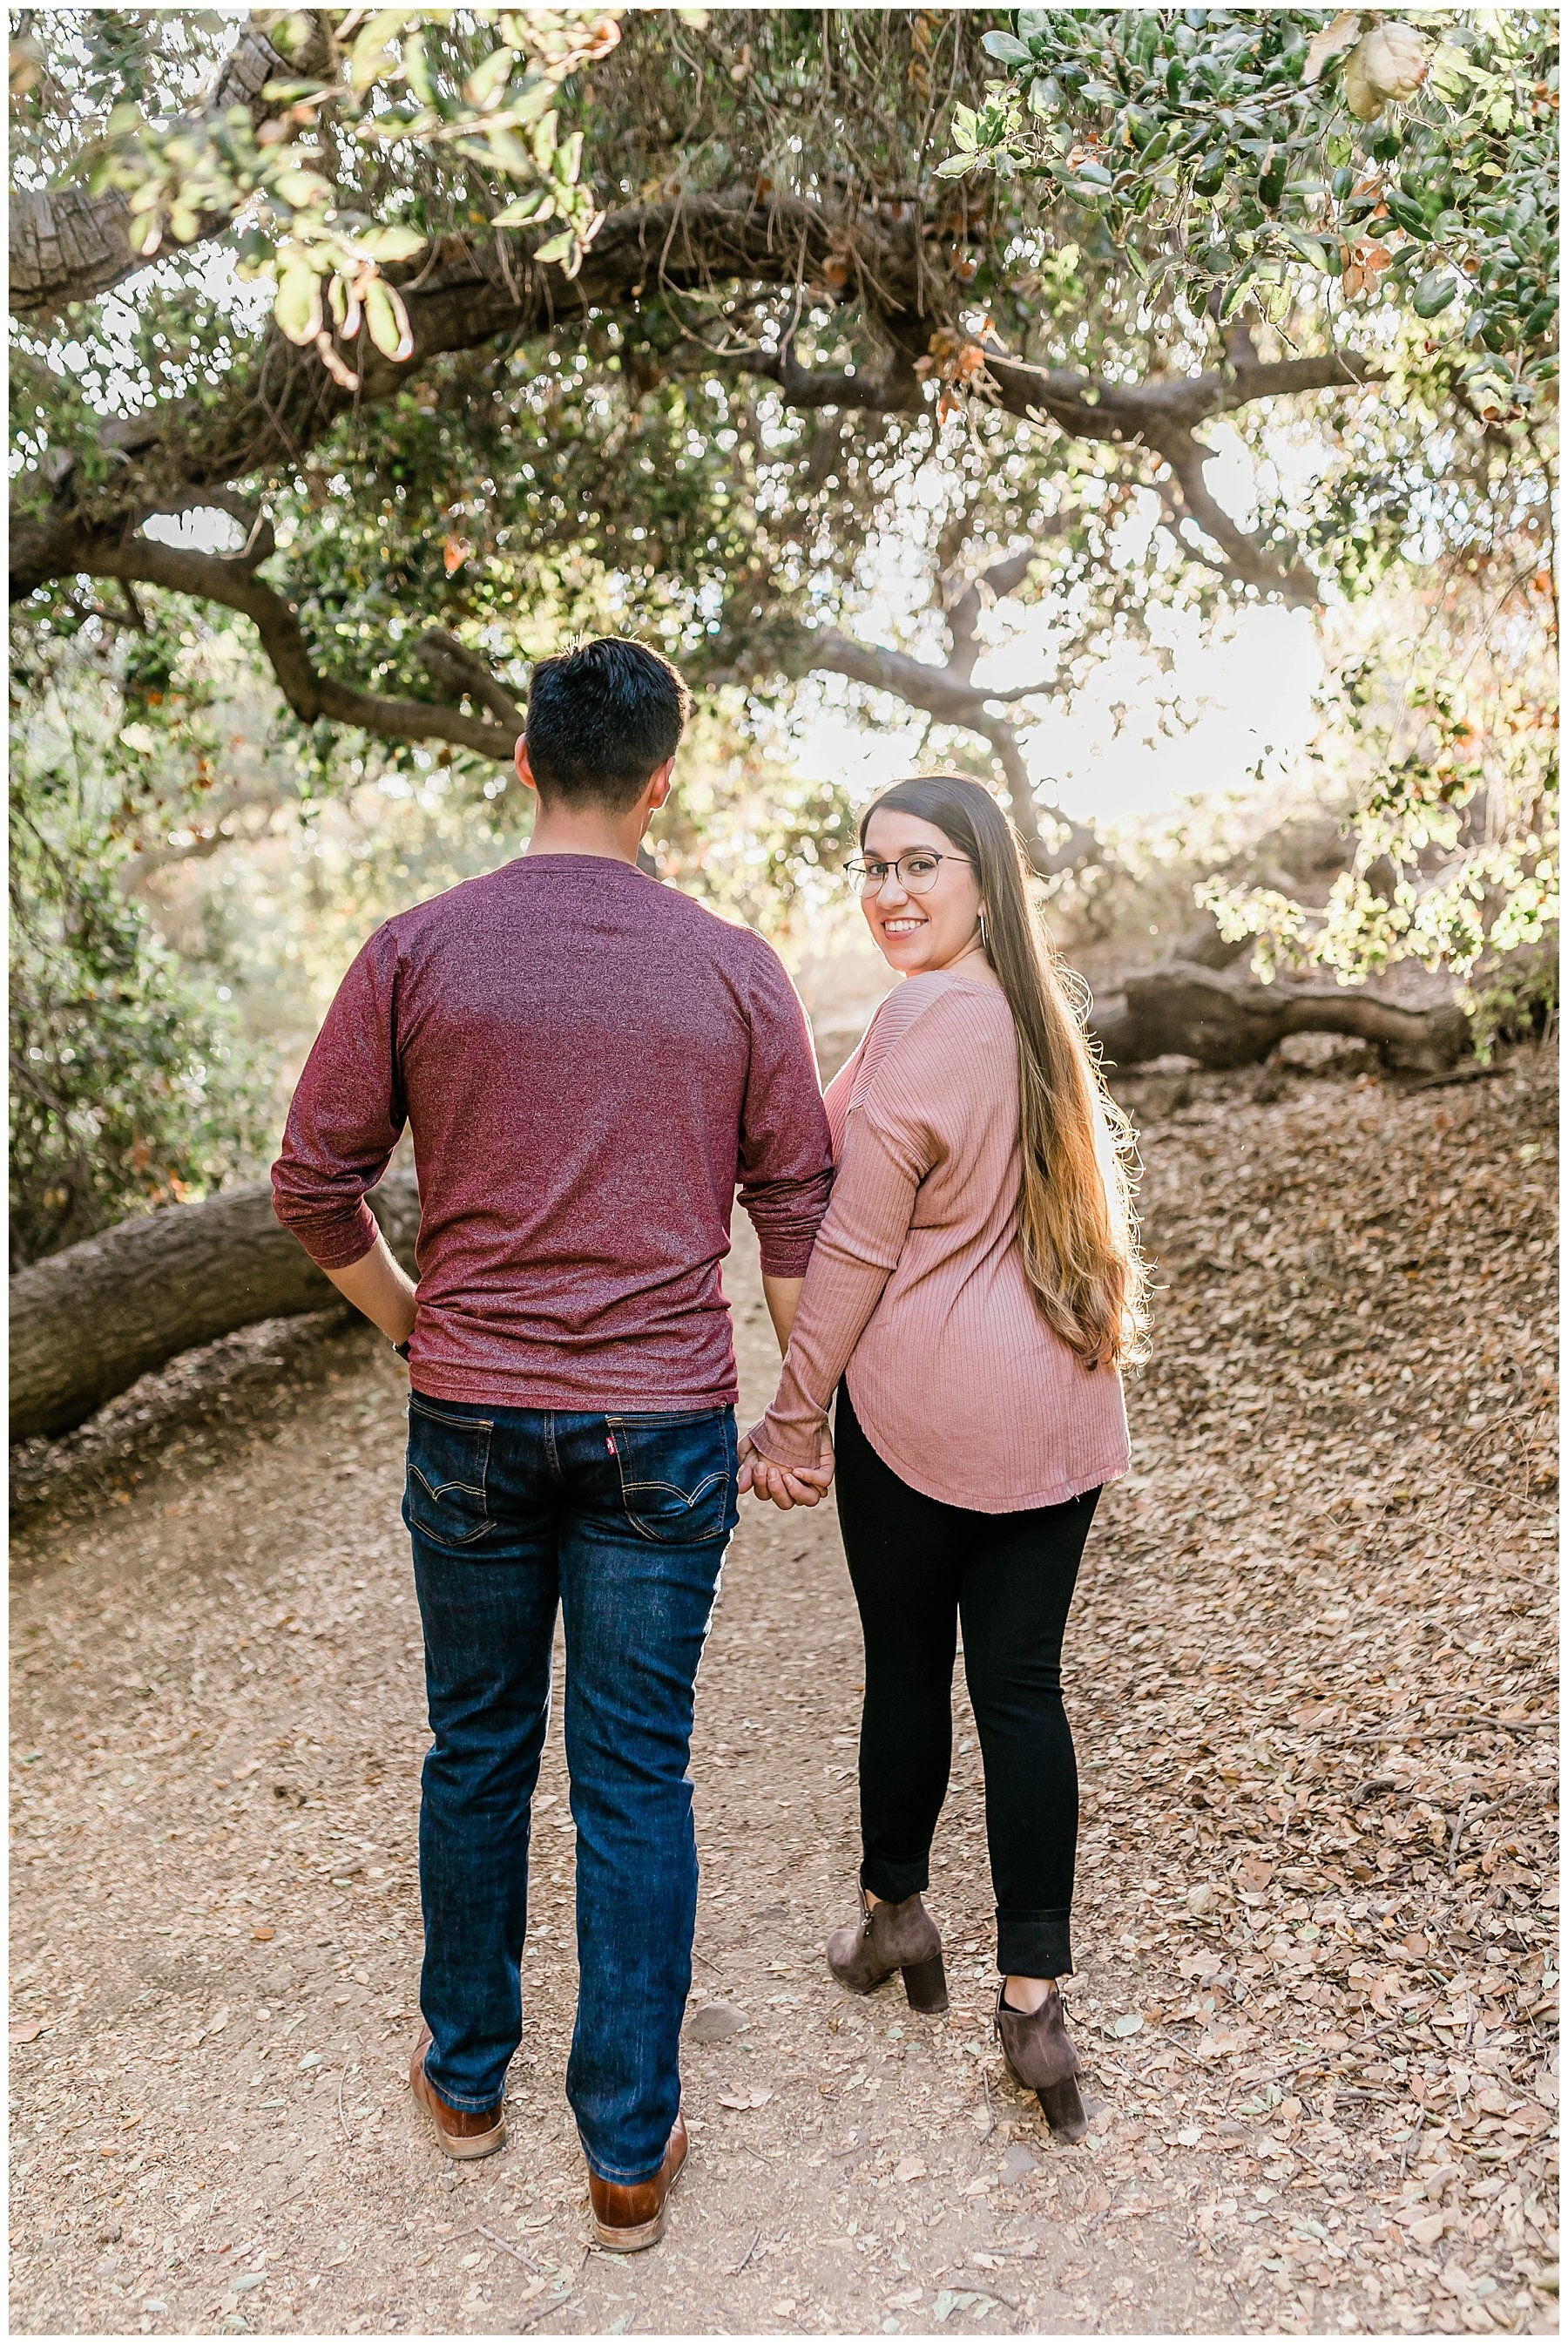  engaged couple walking through pathway hand in hand 